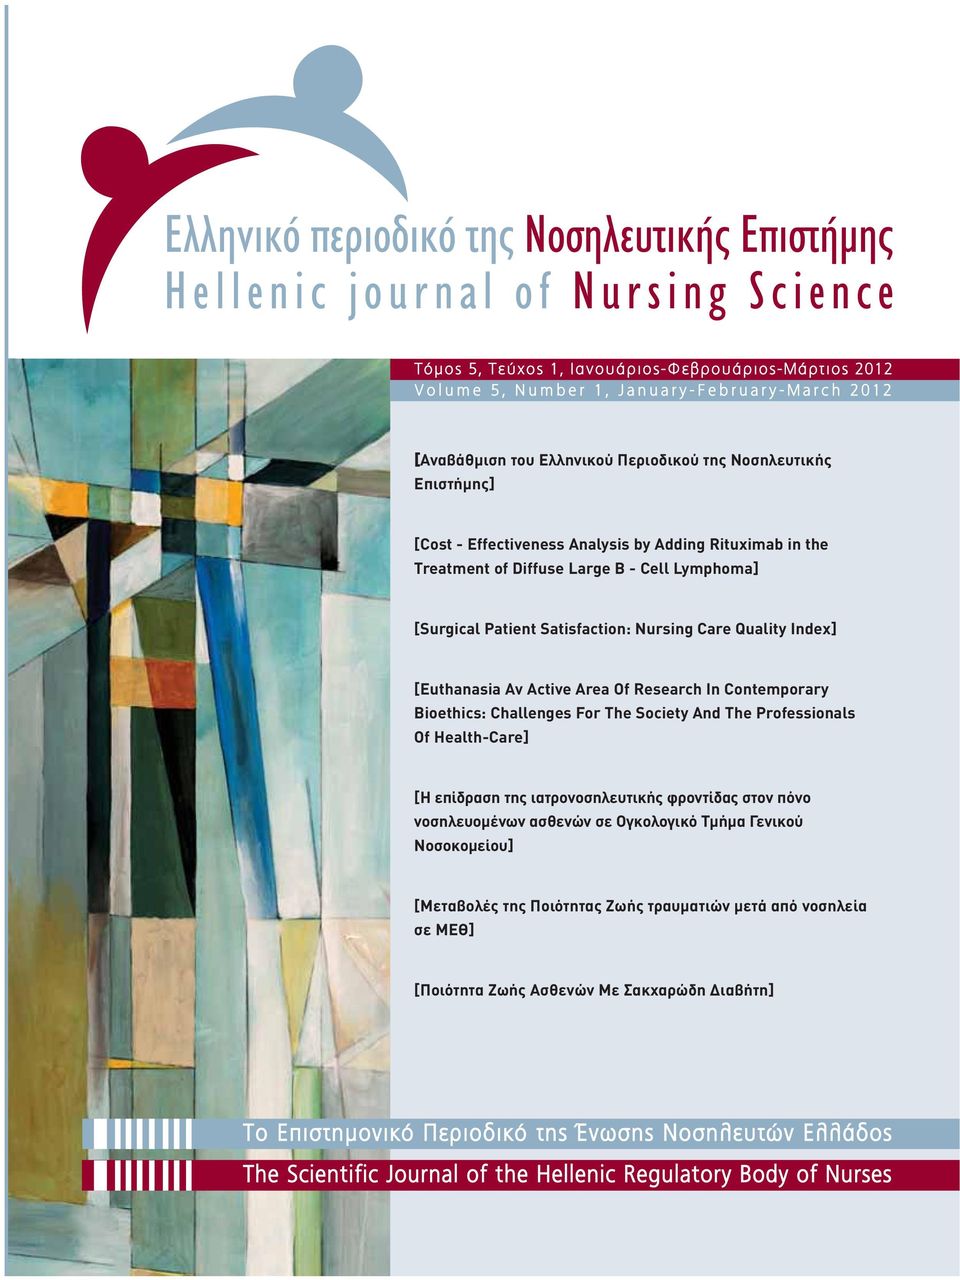 Diffuse Large B - Cell Lymphoma] [Surgical Patient Satisfaction: Nursing Care Quality Index] [Euthanasia Αν Active Area Of Research In Contemporary Bioethics: Challenges For The Society And The